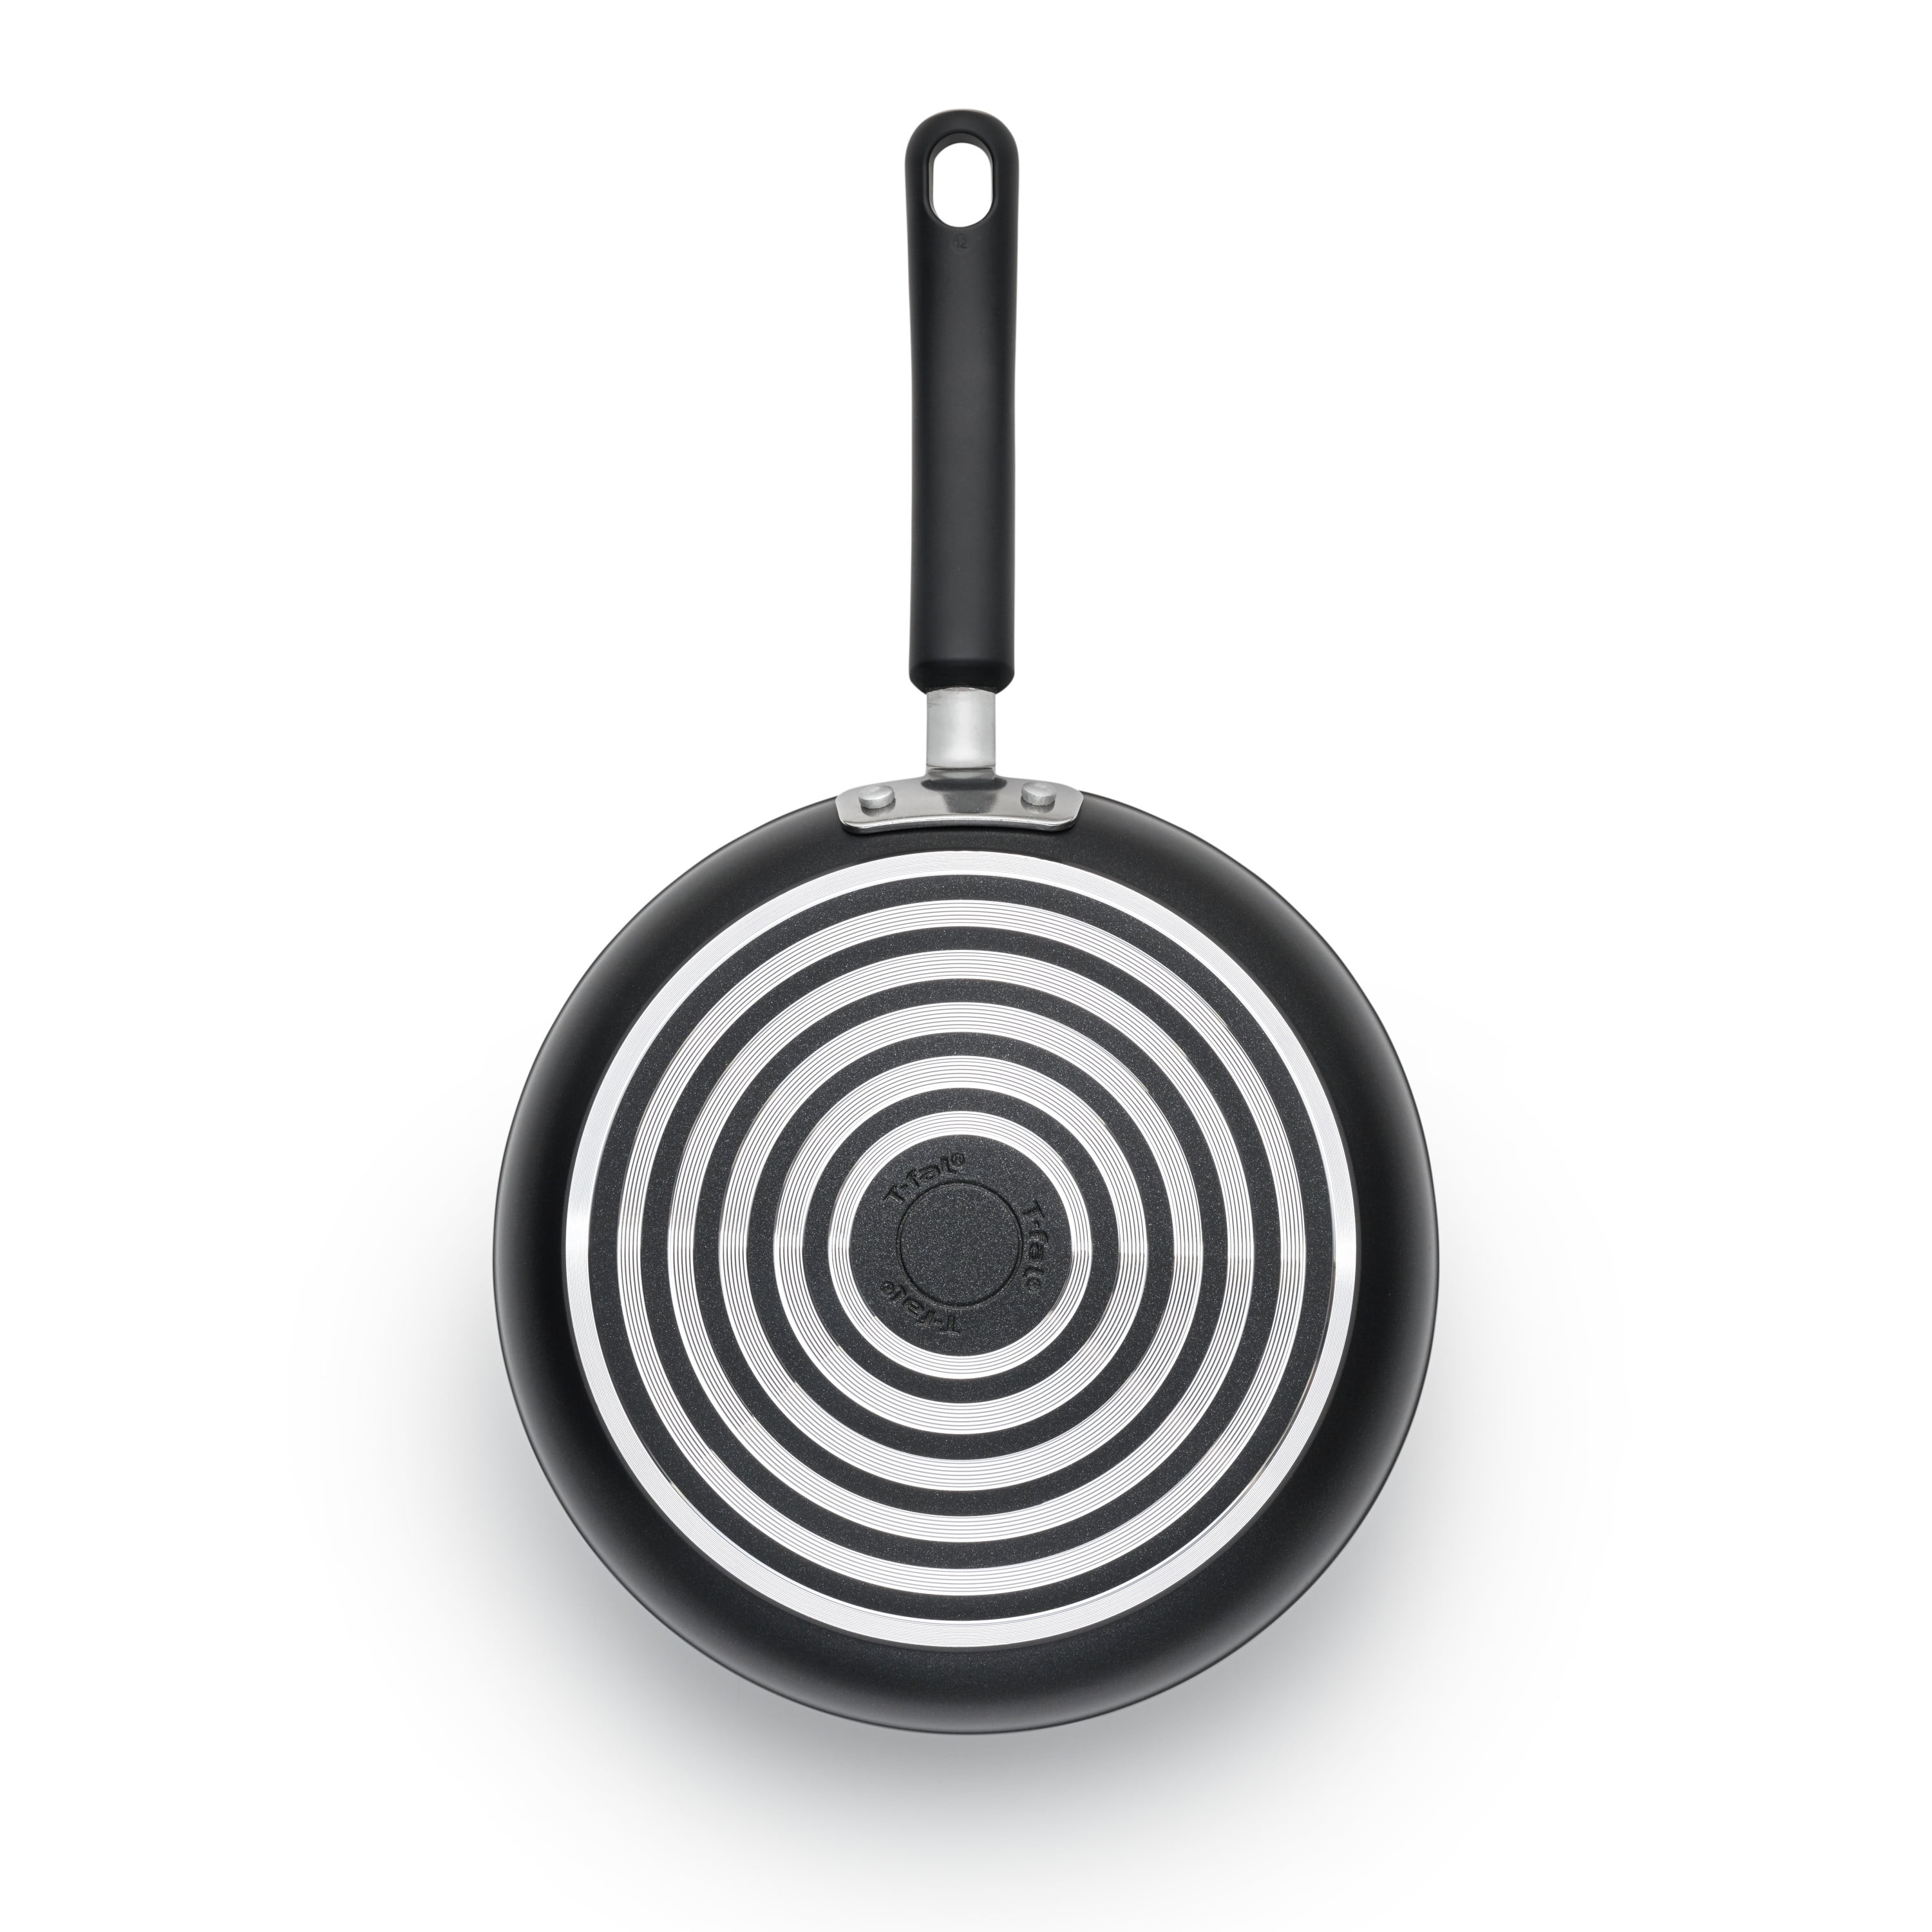 T-fal Experience Nonstick Fry Pan 8 Inch Induction Oven Safe 400F Cookware,  Pots and Pans, Dishwasher Safe Black